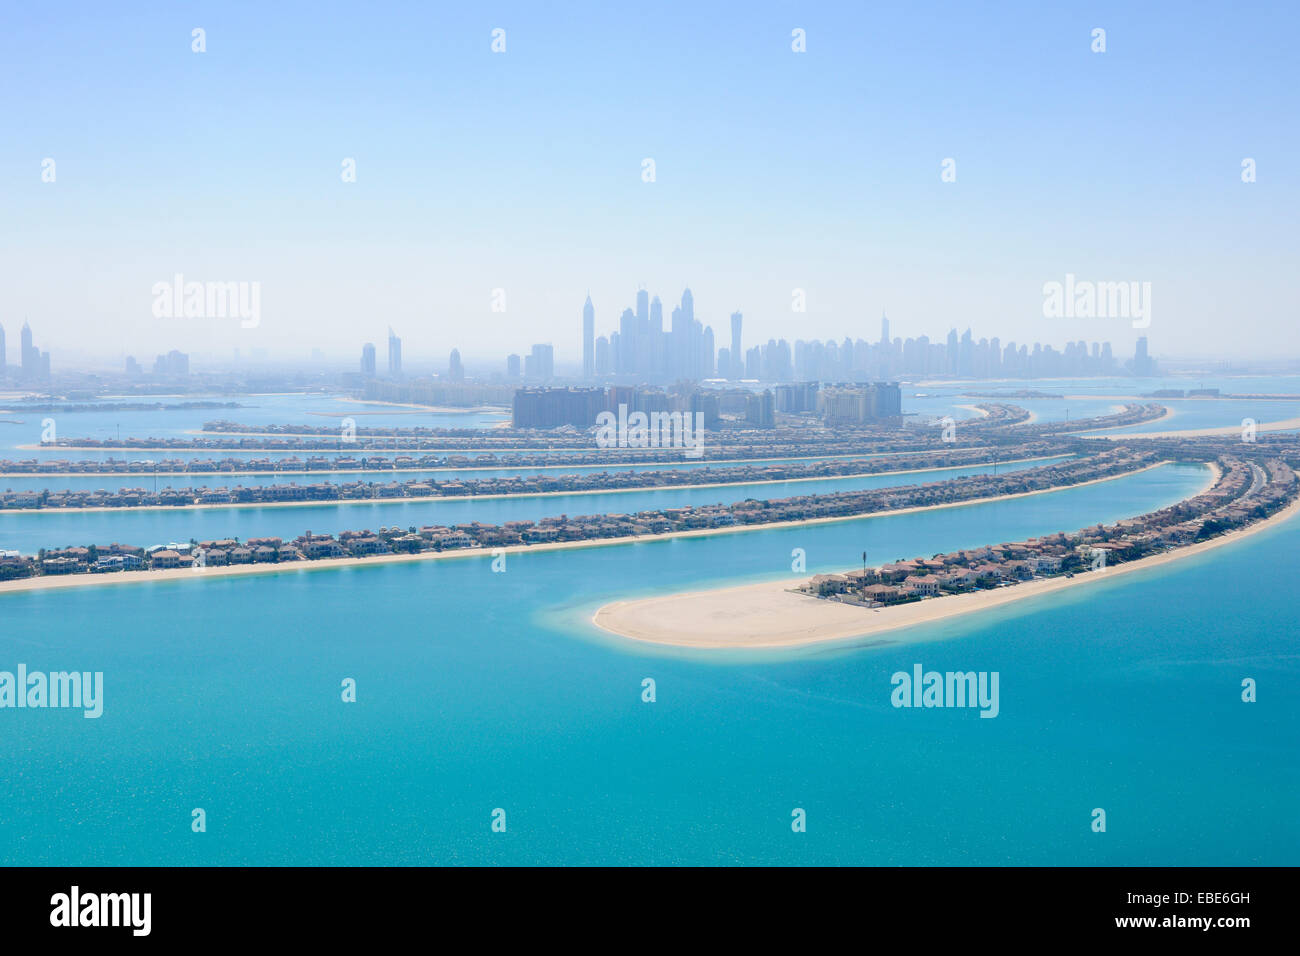 Aerial View of Palm Jumeirah with Skyscrapers in background, Dubai, United Arab Emirates Stock Photo